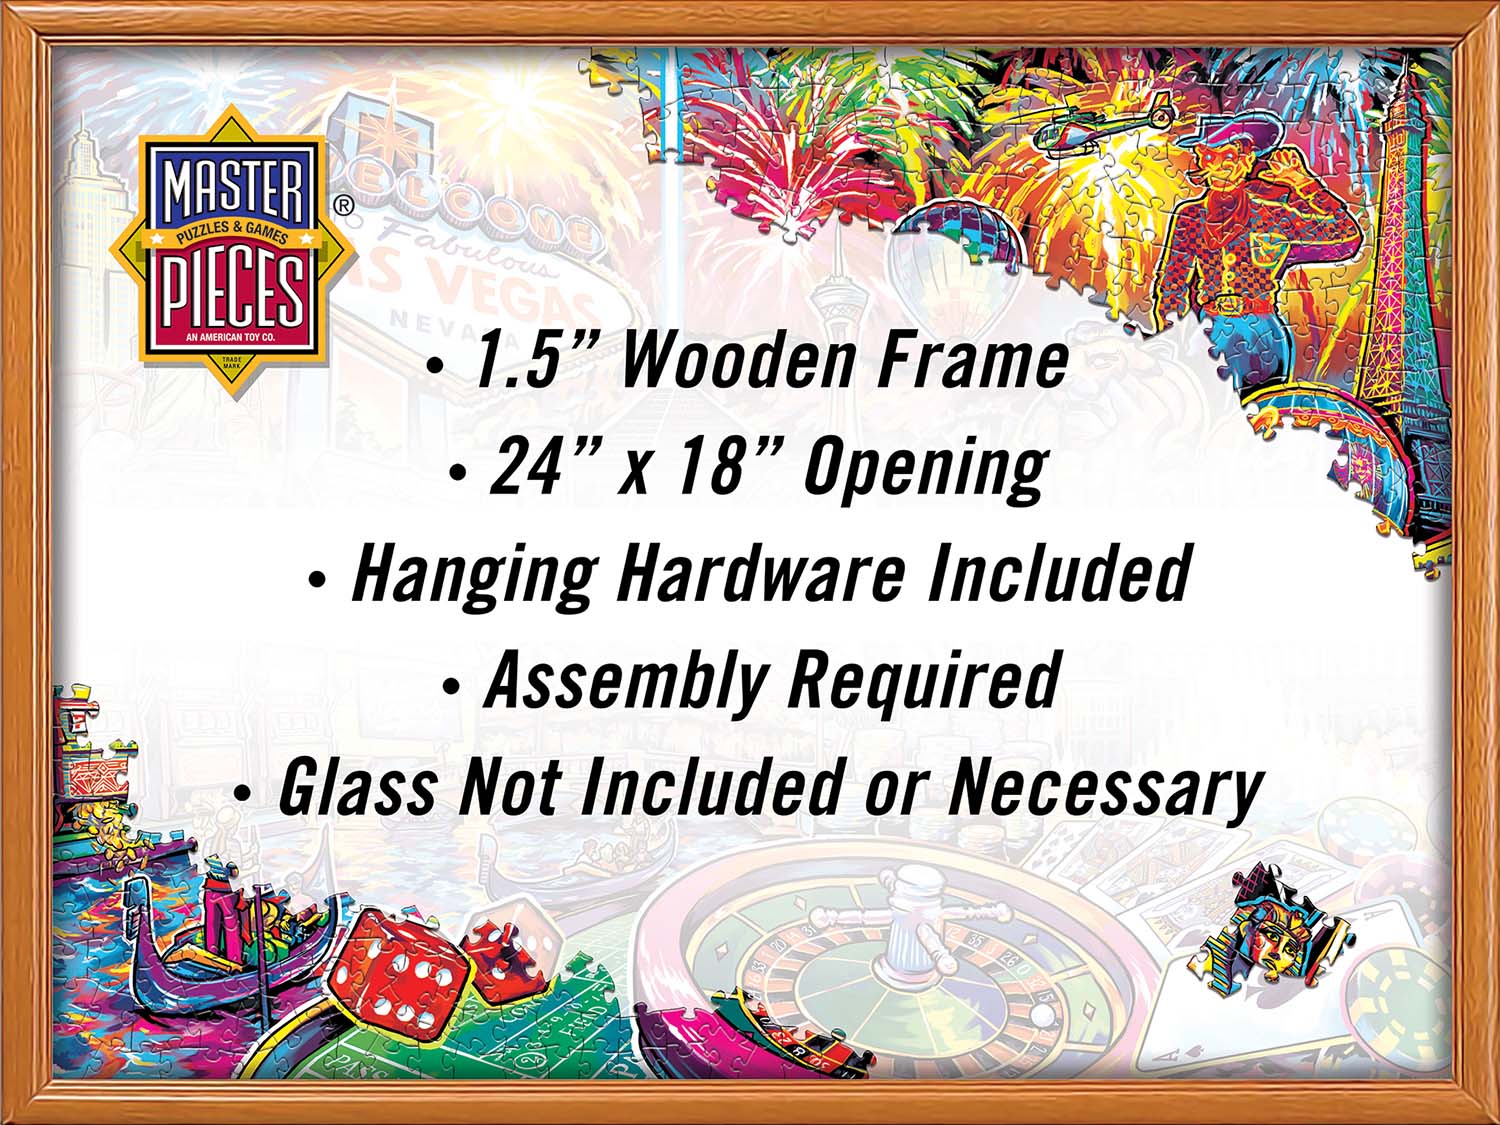 18" x 24" Wood Puzzle Frame